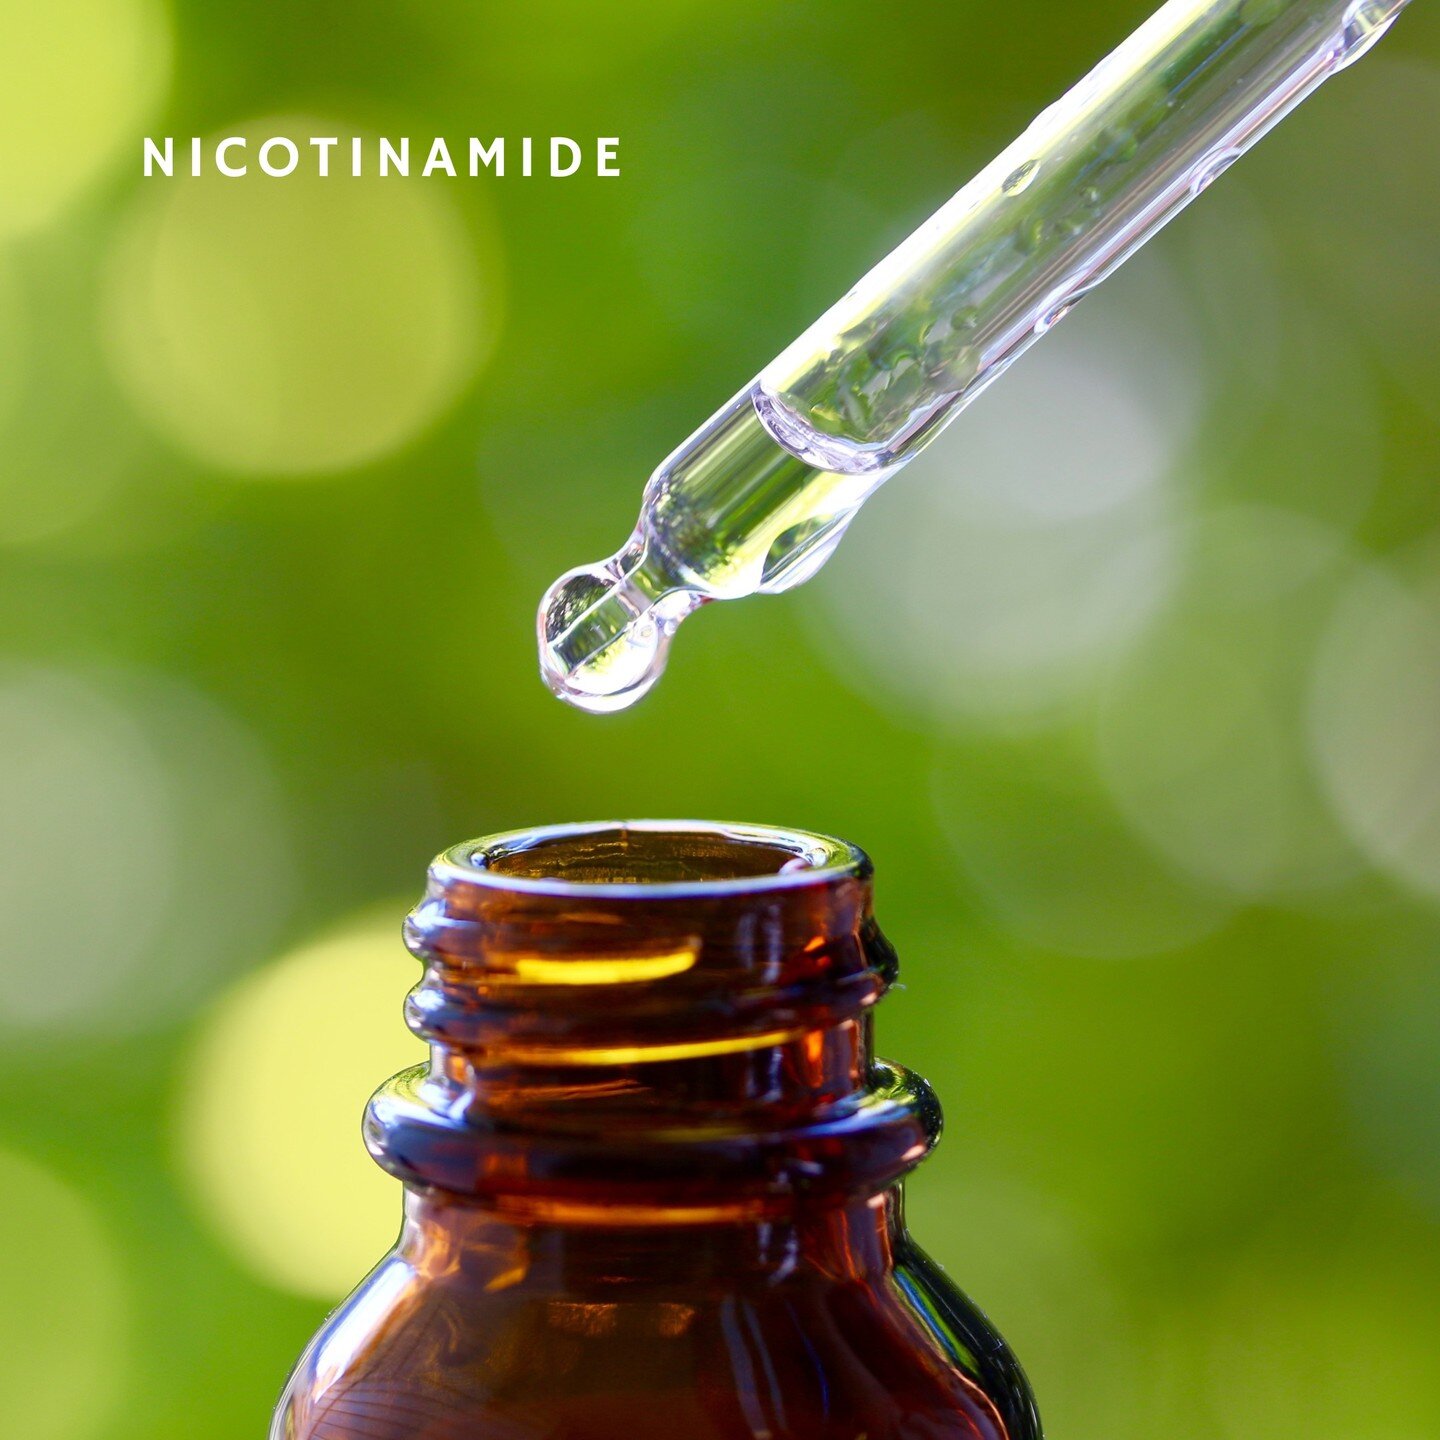 Nicotinamide shows promise for the treatment of a wide range of dermatological conditions, including autoimmune blistering disorders, acne, rosacea, aging skin and atopic dermatitis. In particular, recent studies have also shown it to be a potential 